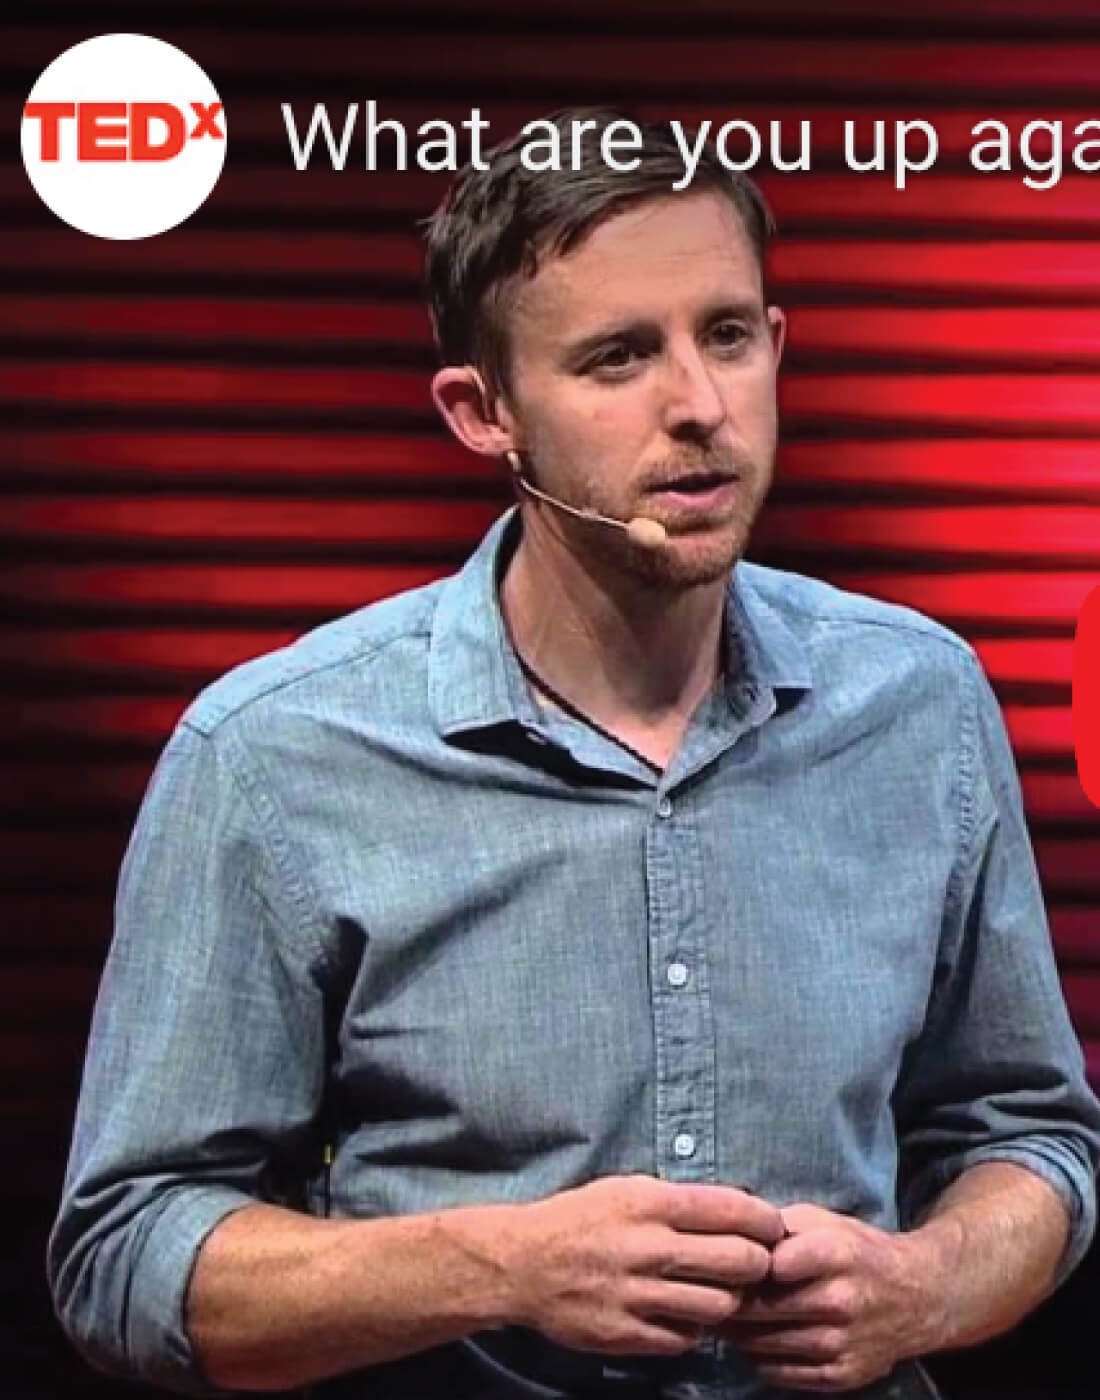 Inspired: Tommy Caldwell TED Talk Takeaways